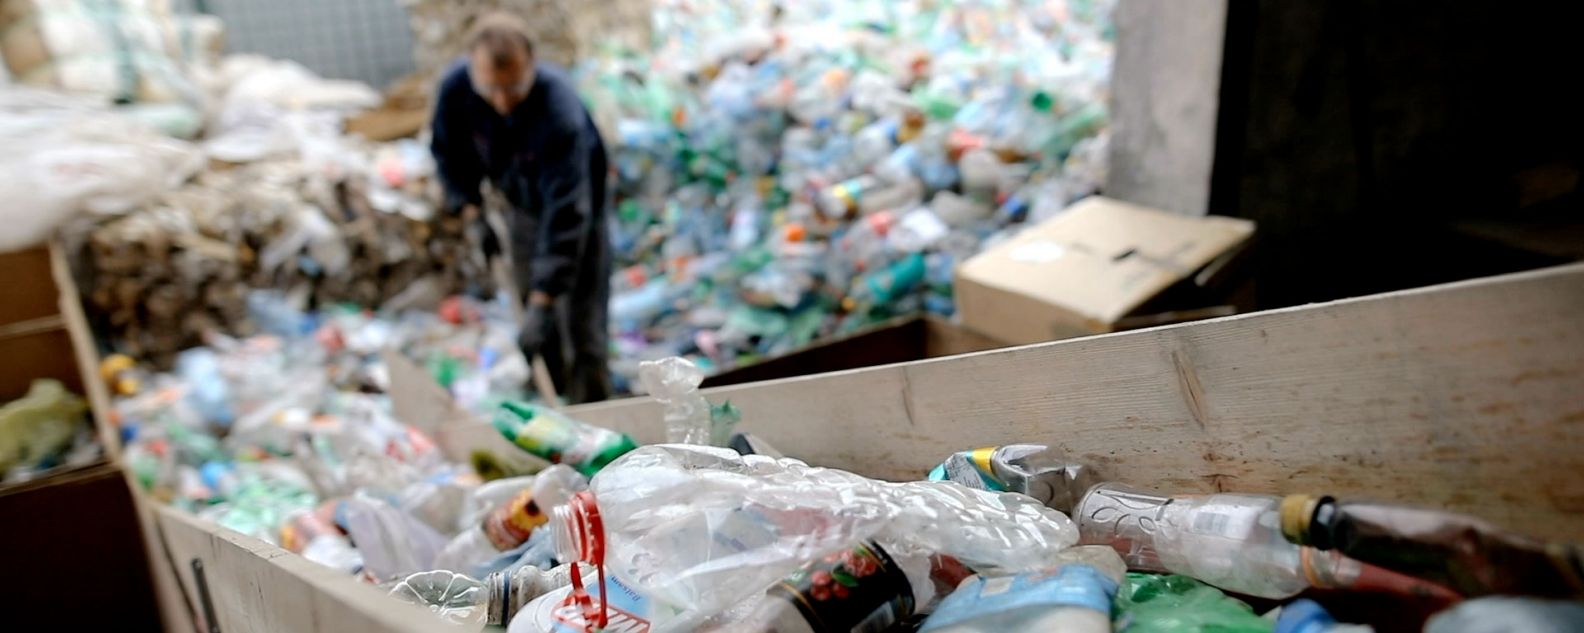 At a recycling factory, a worker pushes plastic bottles with a shovel for recycling